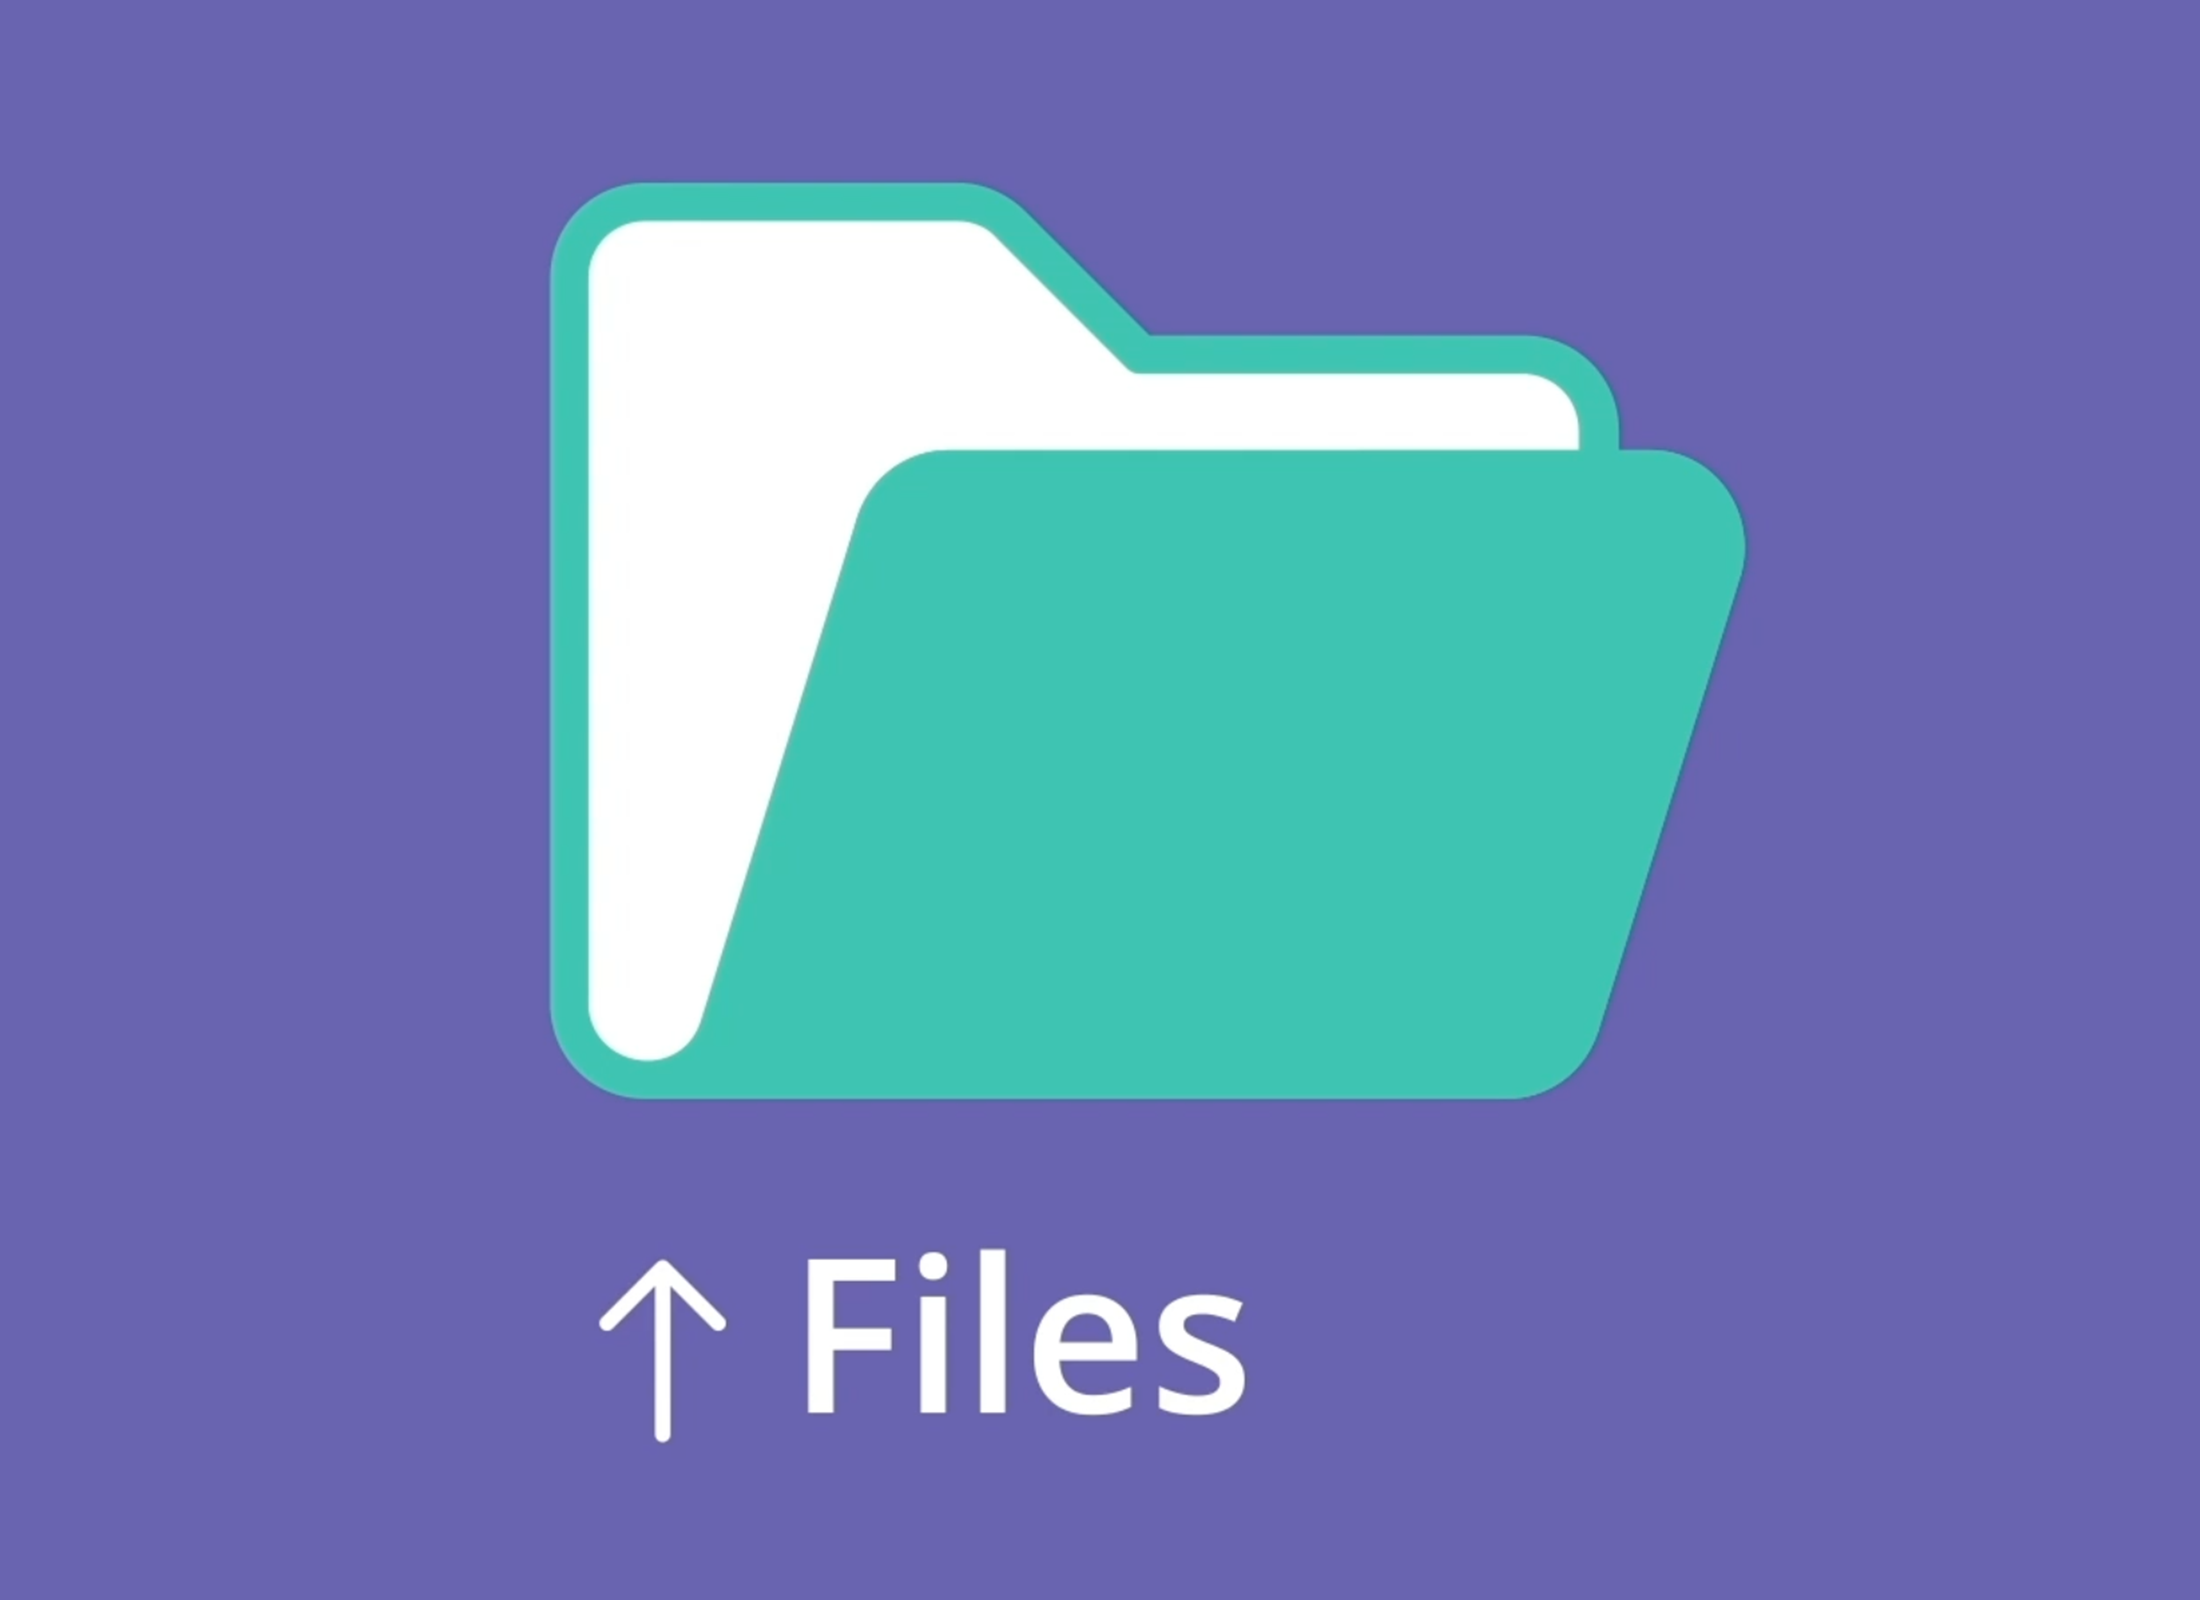 Files on your iPad